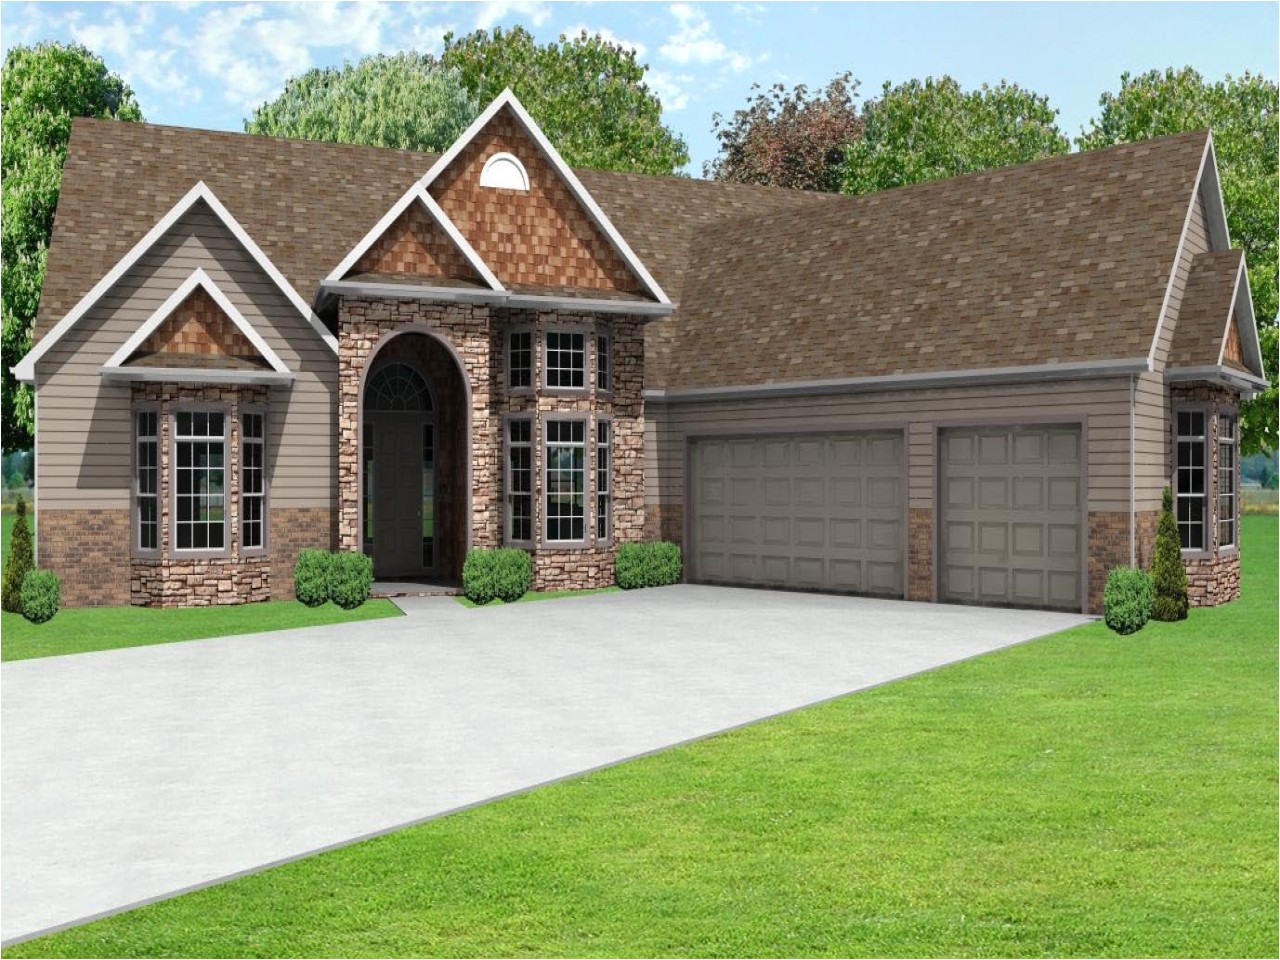 42f1036c00745a4b ranch house plans with 3 car garage ranch house plans with 3 car garage